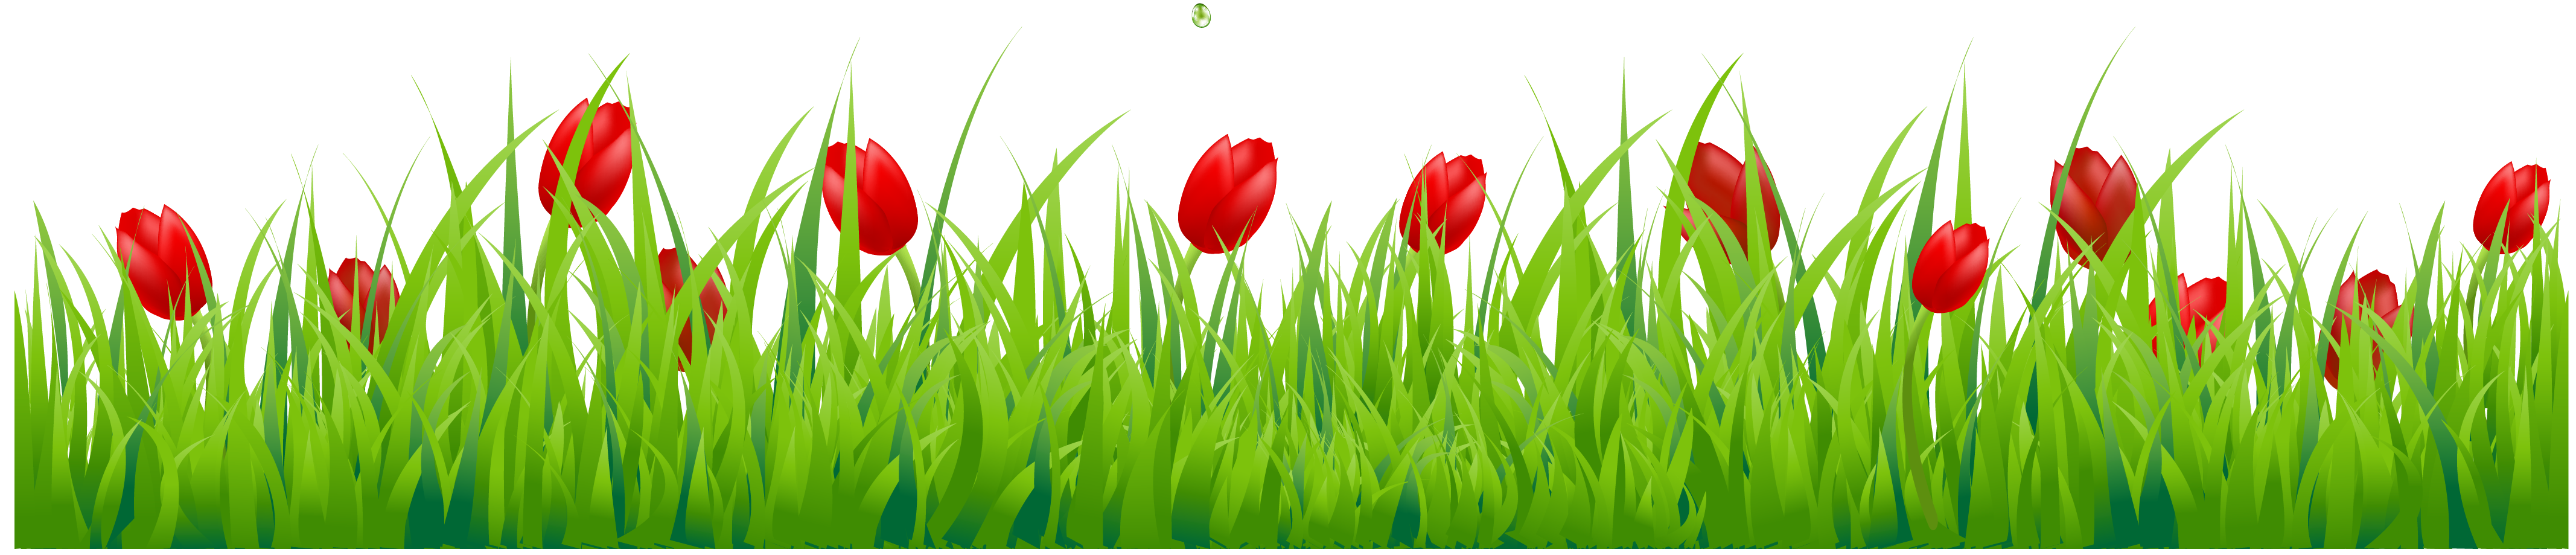 Grass with red tulips clipart 0